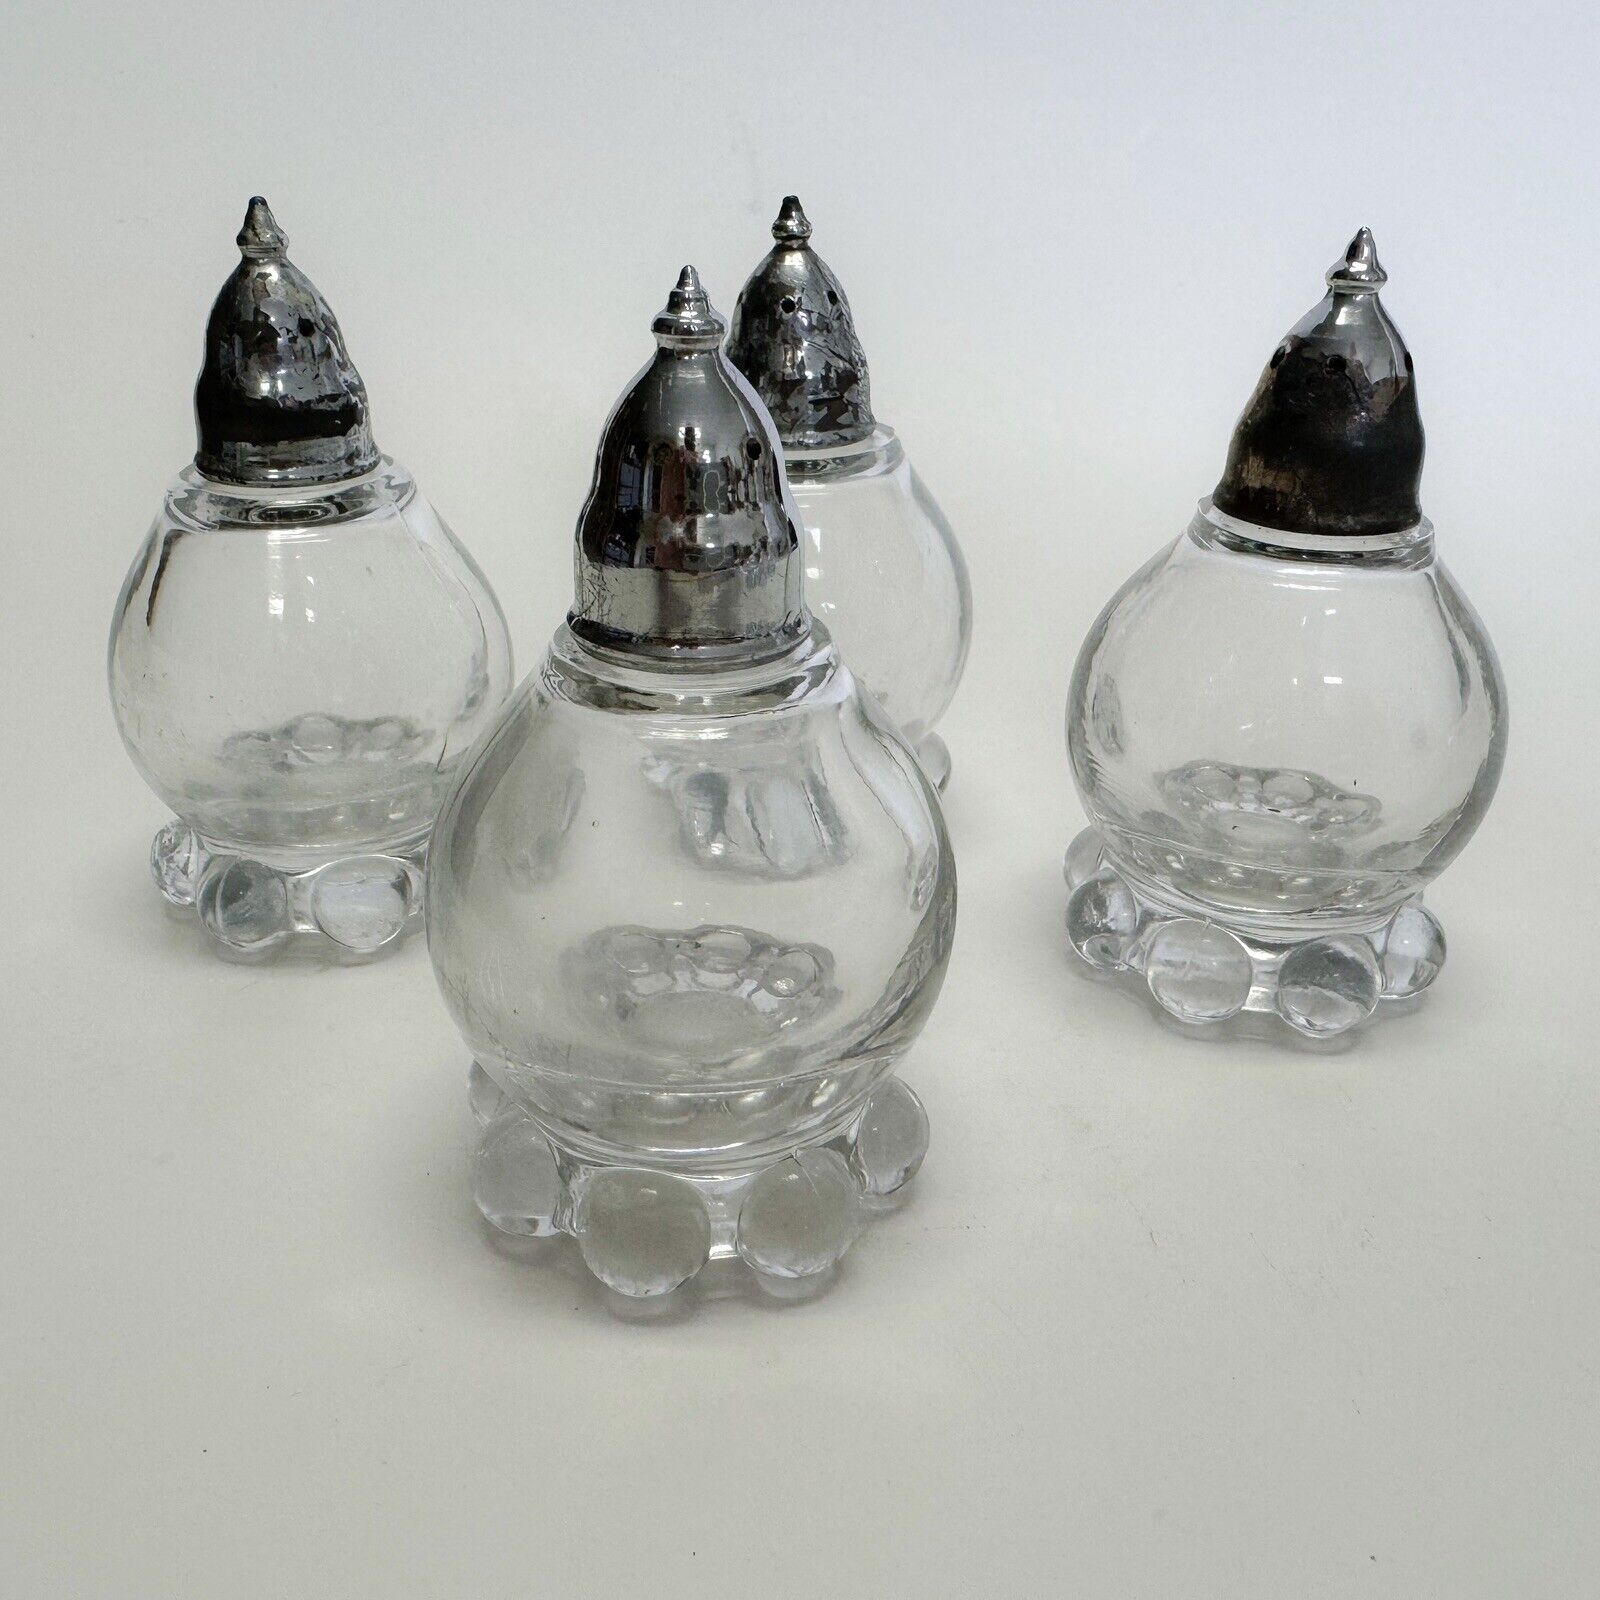 Vintage Candlewick Imperial Glass Set Of Four Salt and Pepper Shakers Metal Top